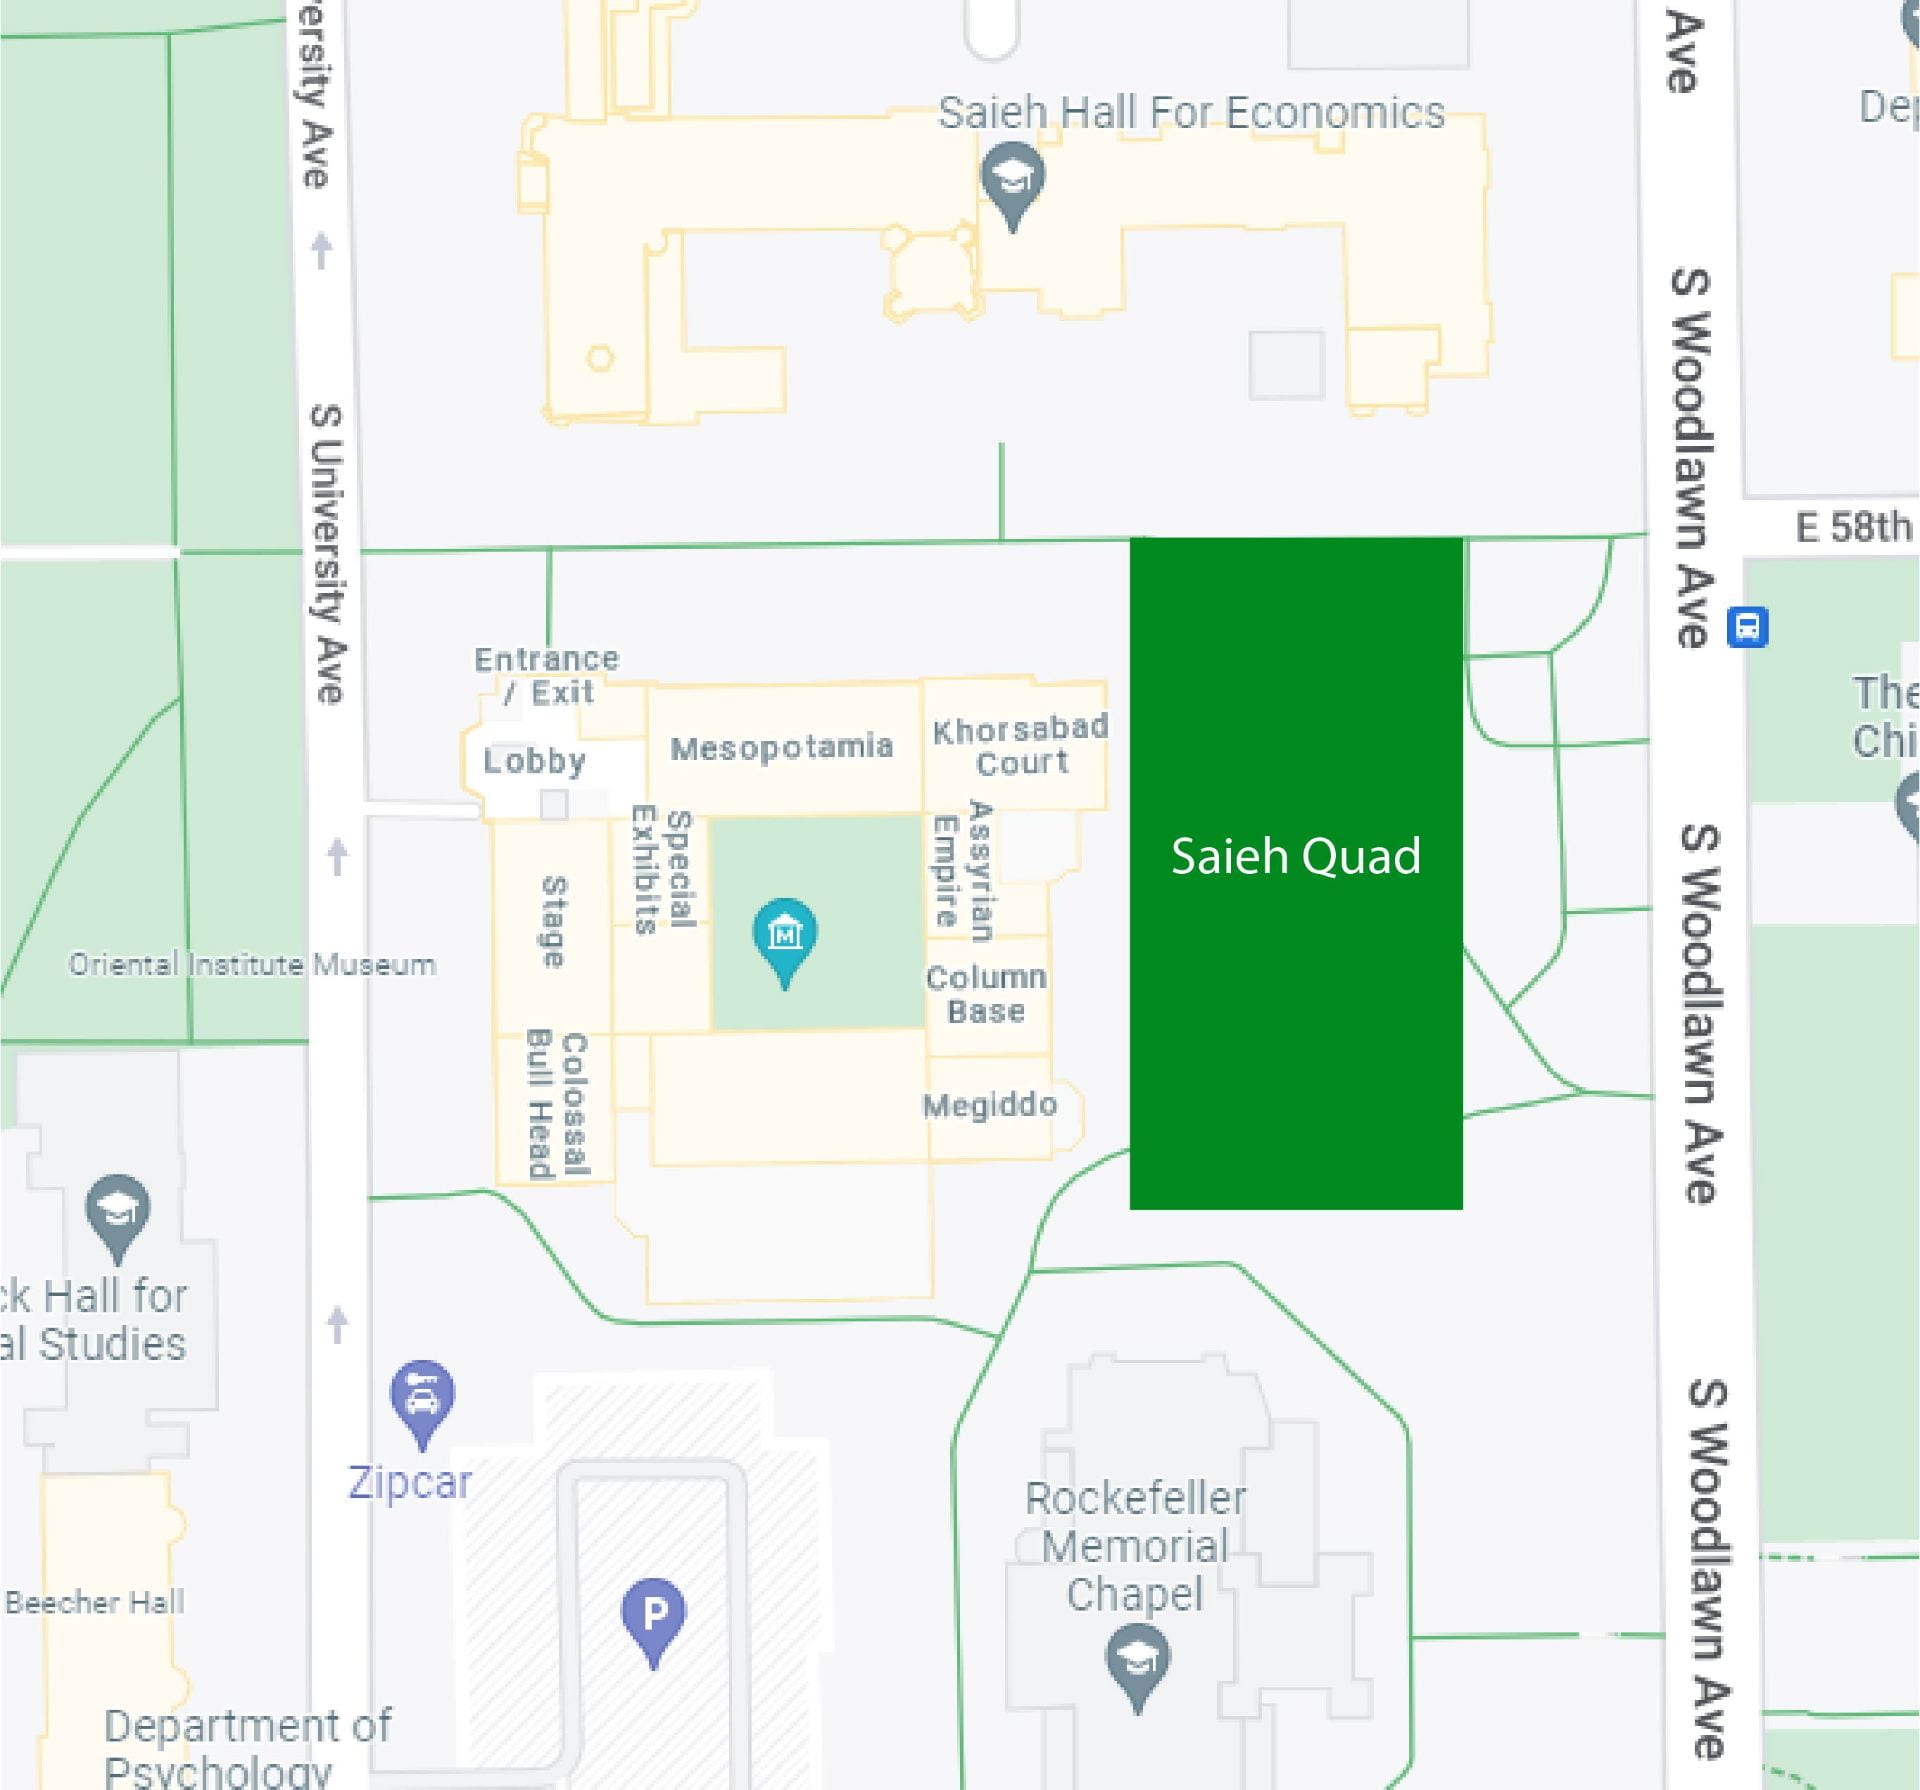 A map showing the location of the Saieh Quad